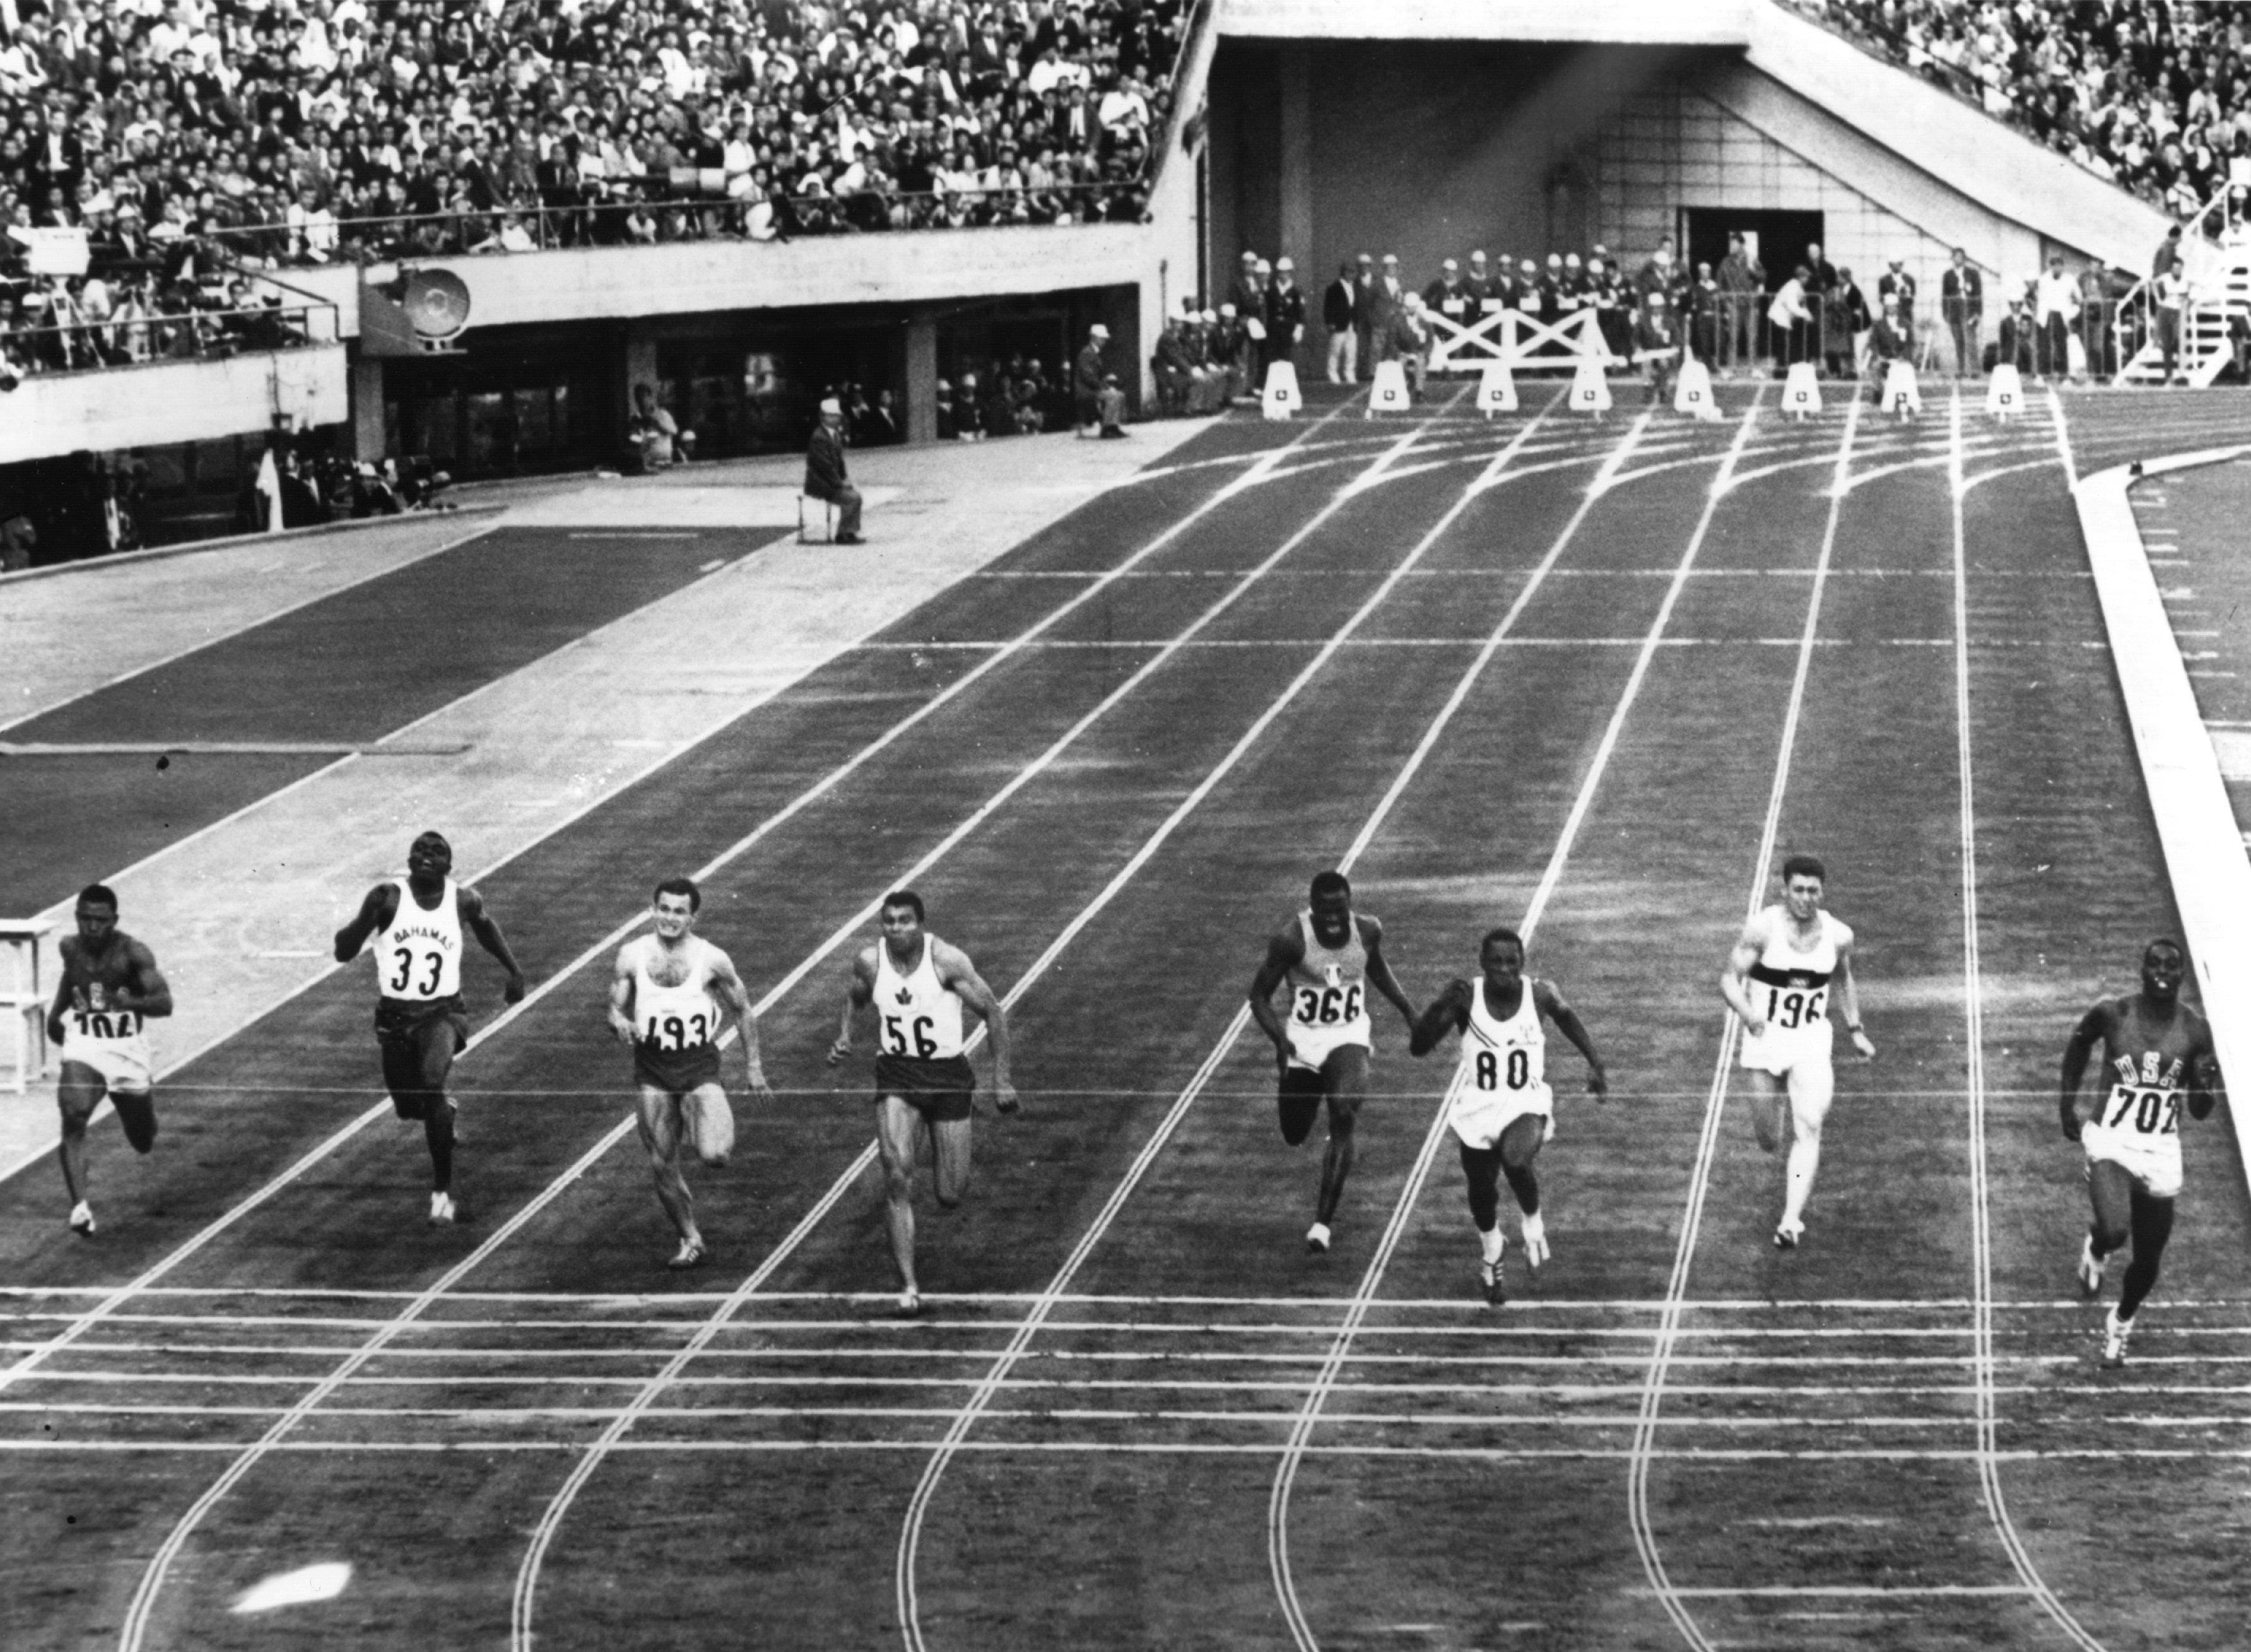 Bob Hayes (lane one) wins the 1964 Olympic 100m title